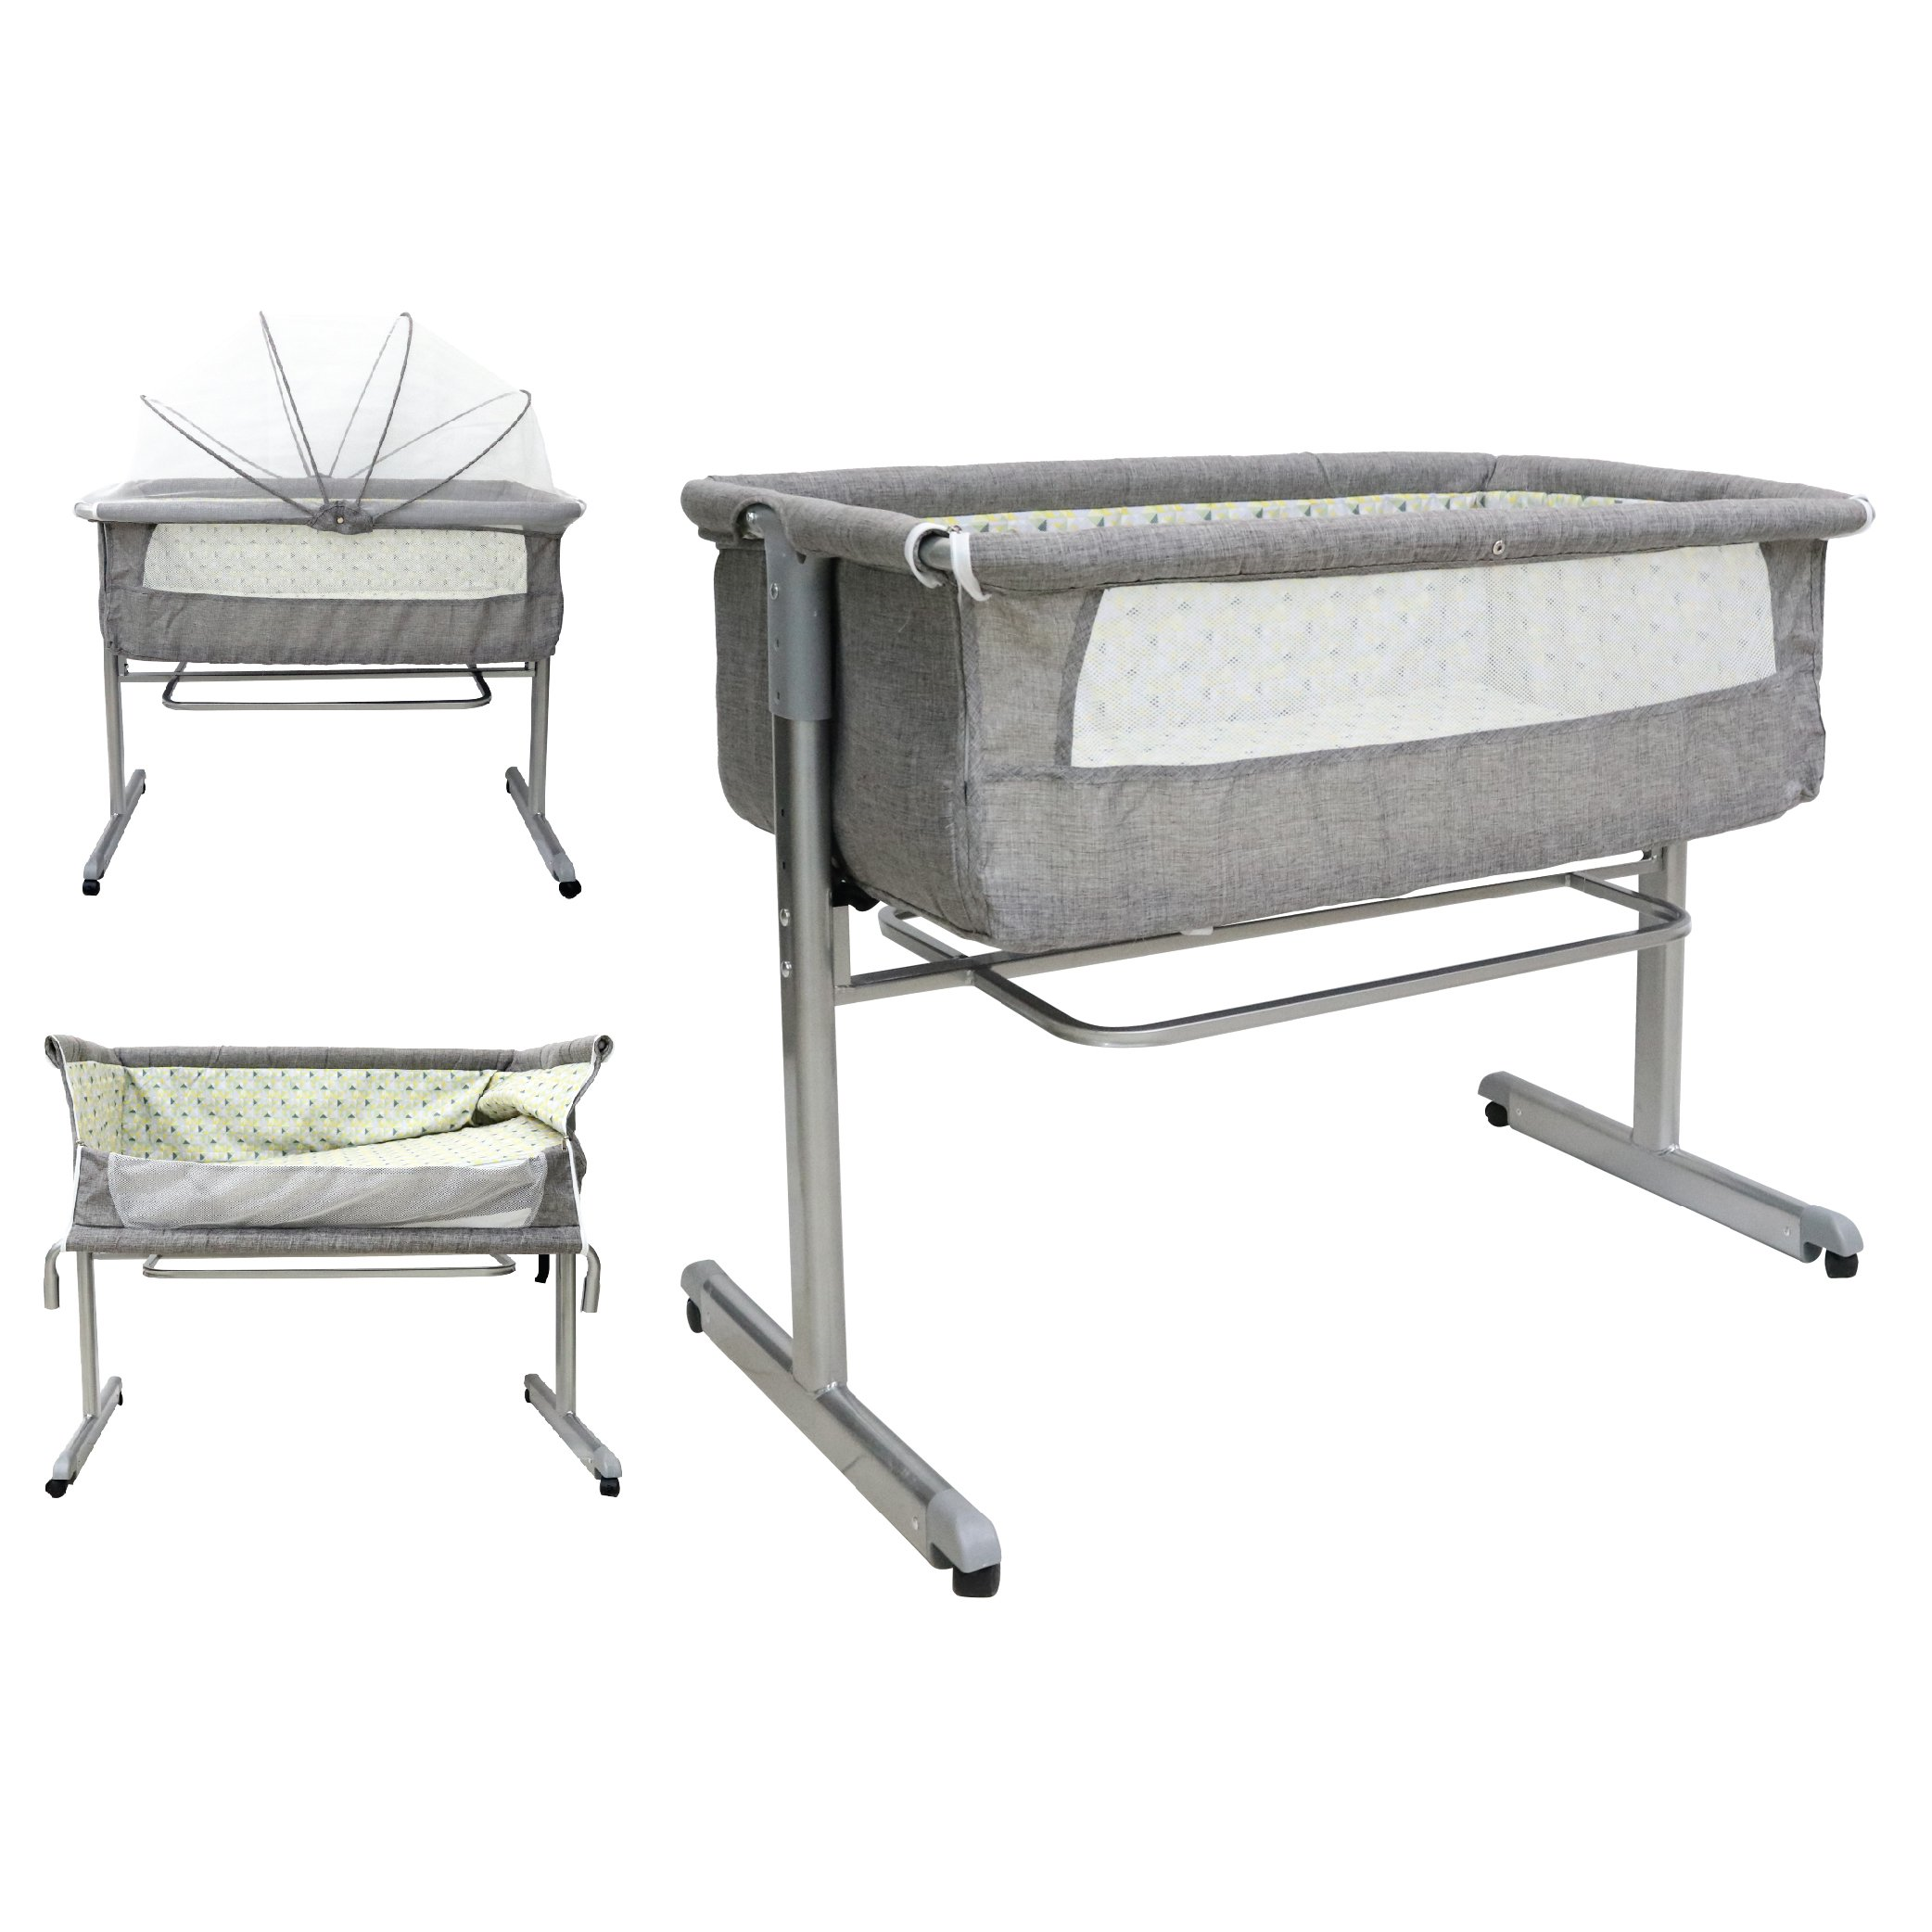 Baby Playpen Bedside Sleeper with mattress and mosquito net (BAY0074GY)